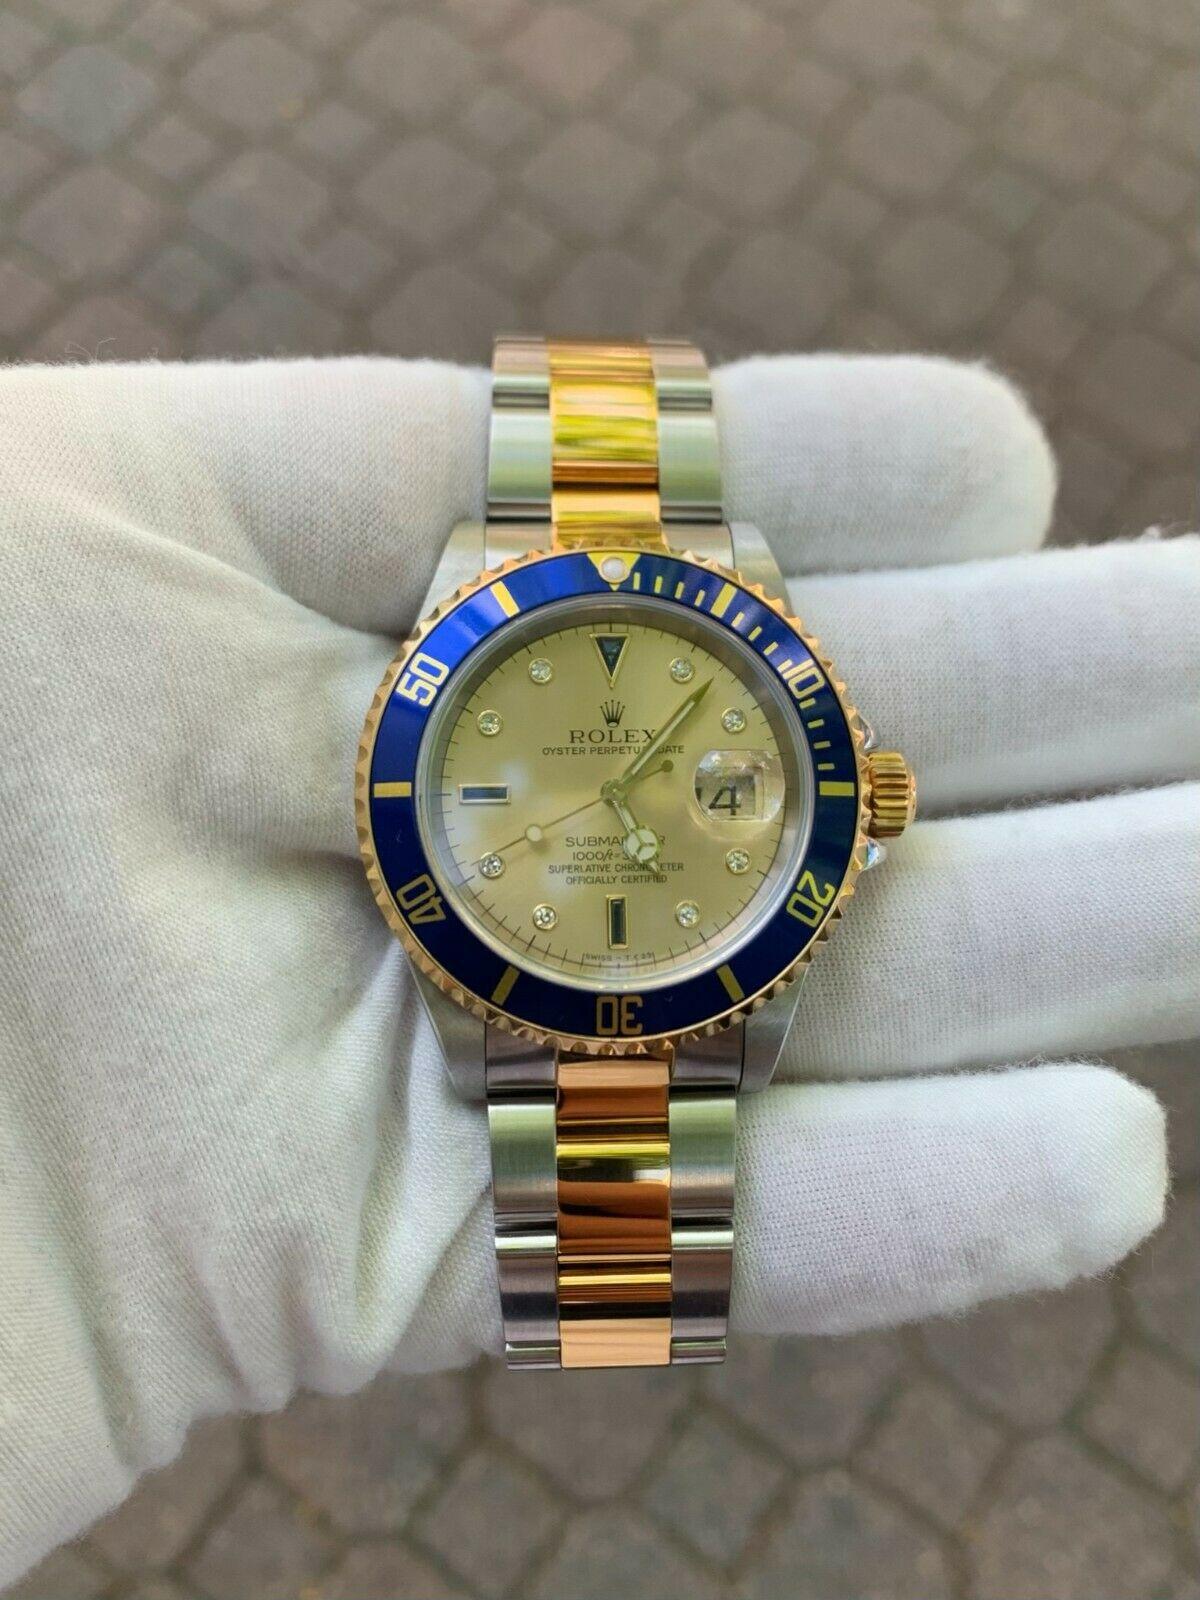 This amazingly and super well-kept Rolex Submariner comes with its original box and papers and remains in excellent physical and mechanical condition. The dial is adorned with genuine round single cut diamonds and custom cut sapphires. The rotating